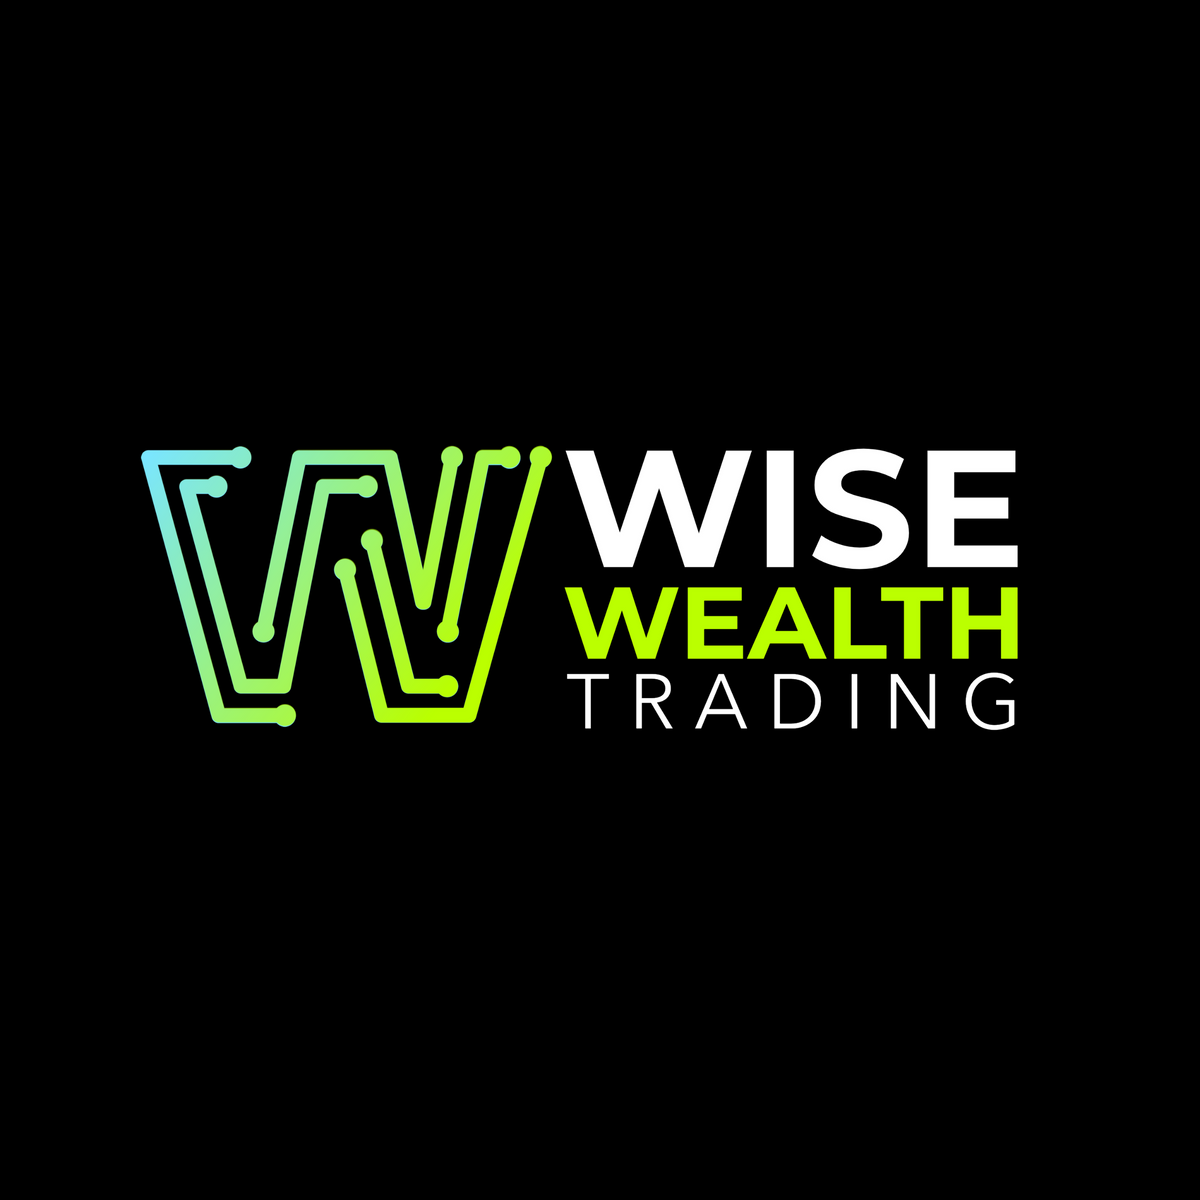 Wise Wealth Trading.png__PID:f9bbce25-b233-4678-ba92-e89dc50b934f